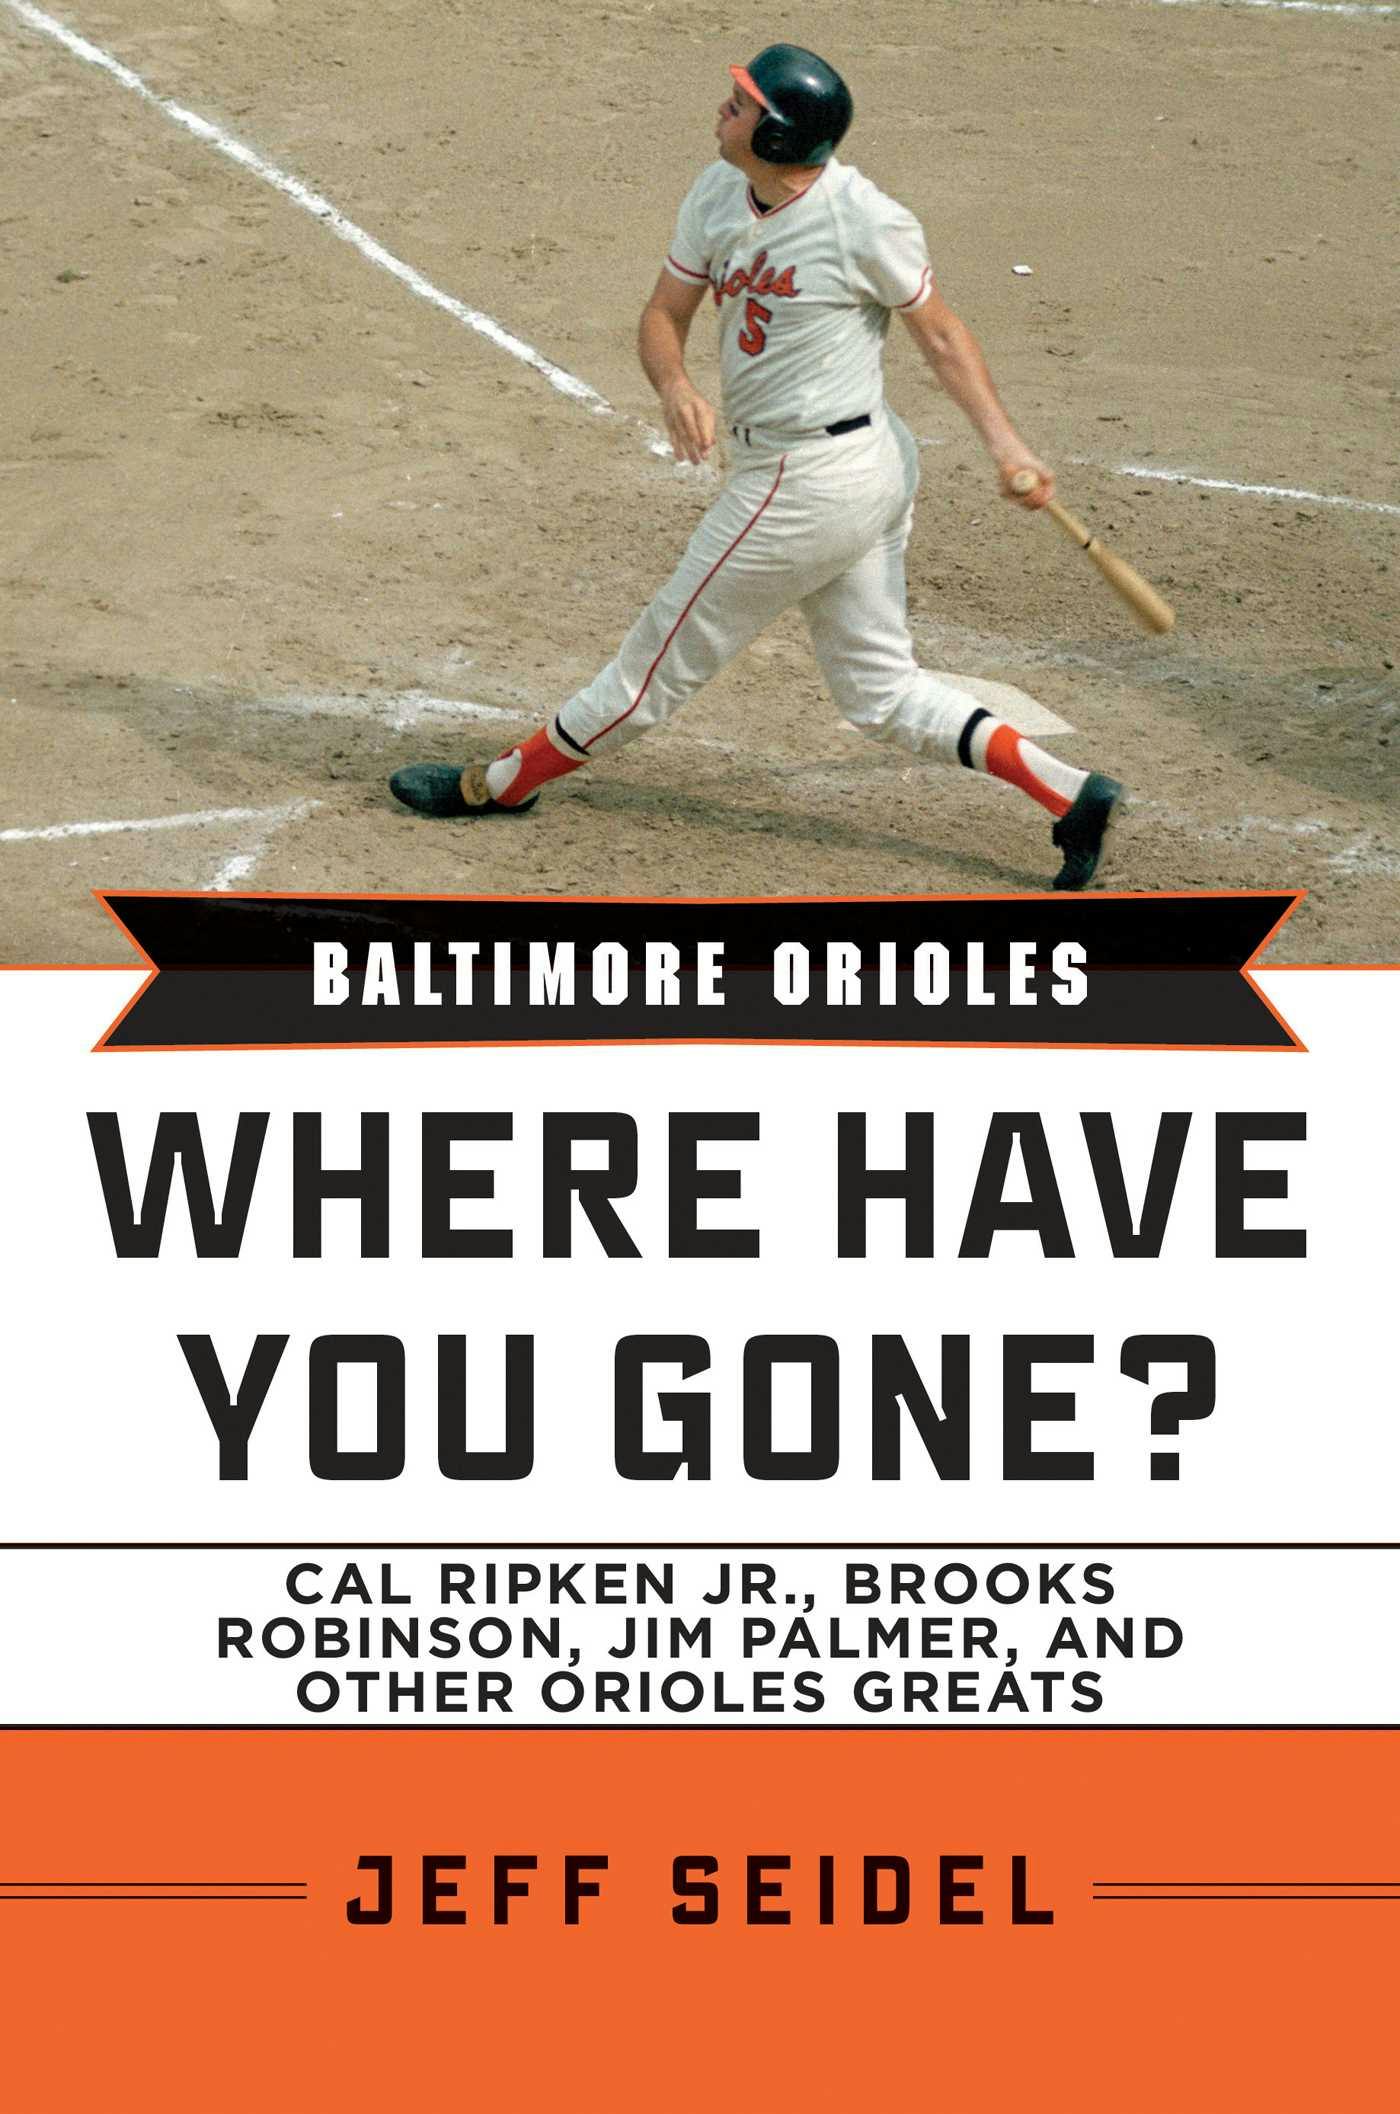 Baltimore Orioles: Where Have You Gone? Cal Ripken Jr., Brooks Robinson, Jim Palmer, and Other Orioles Greats - Jeff Seidel